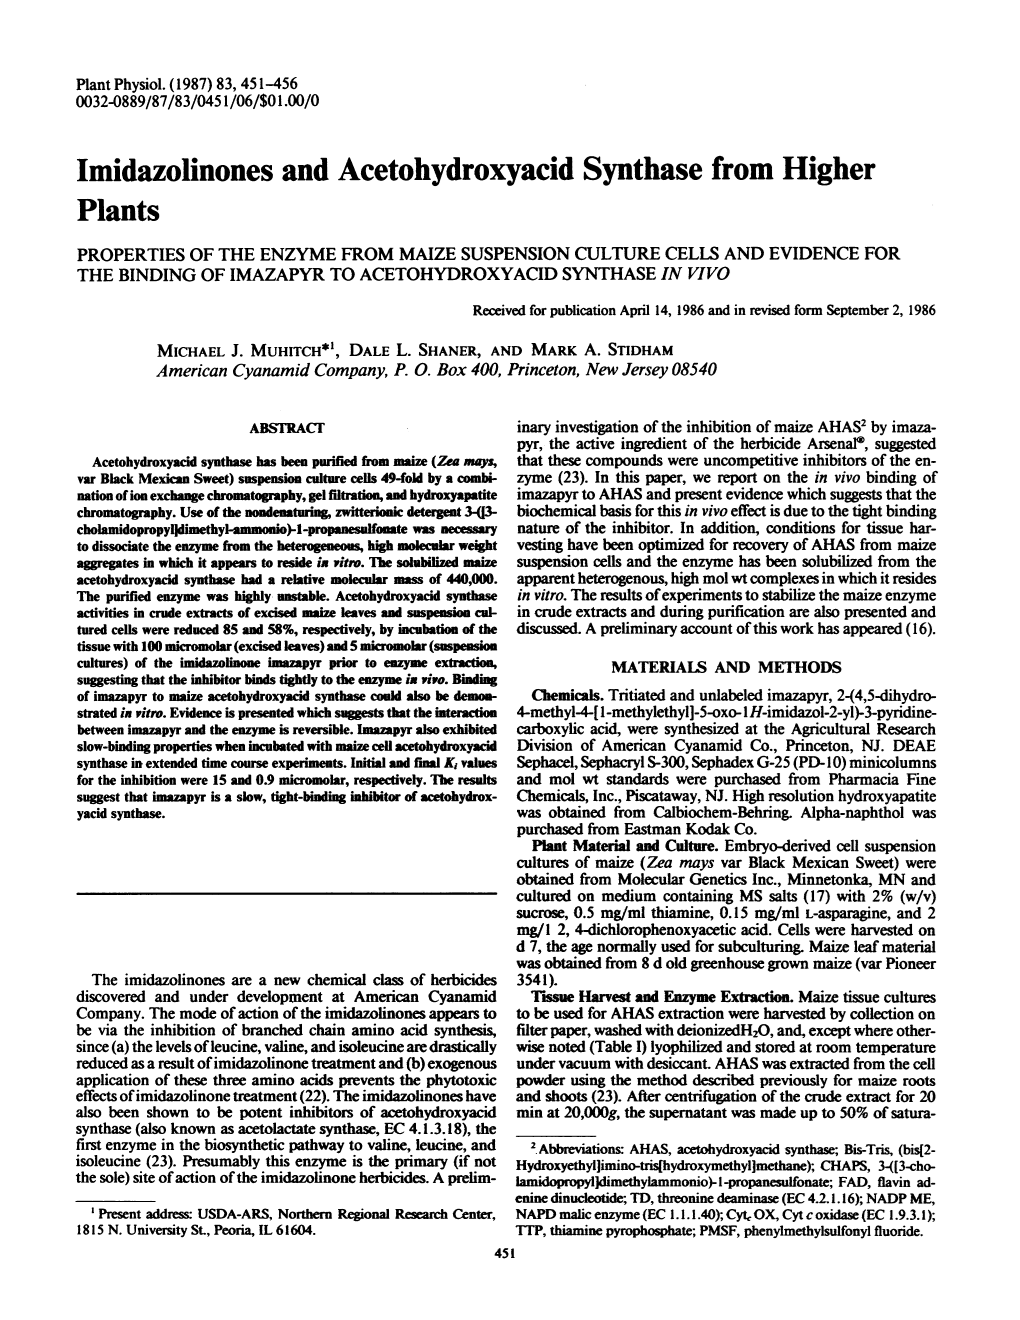 Imidazolinones and Acetohydroxyacid Synthase from Higher